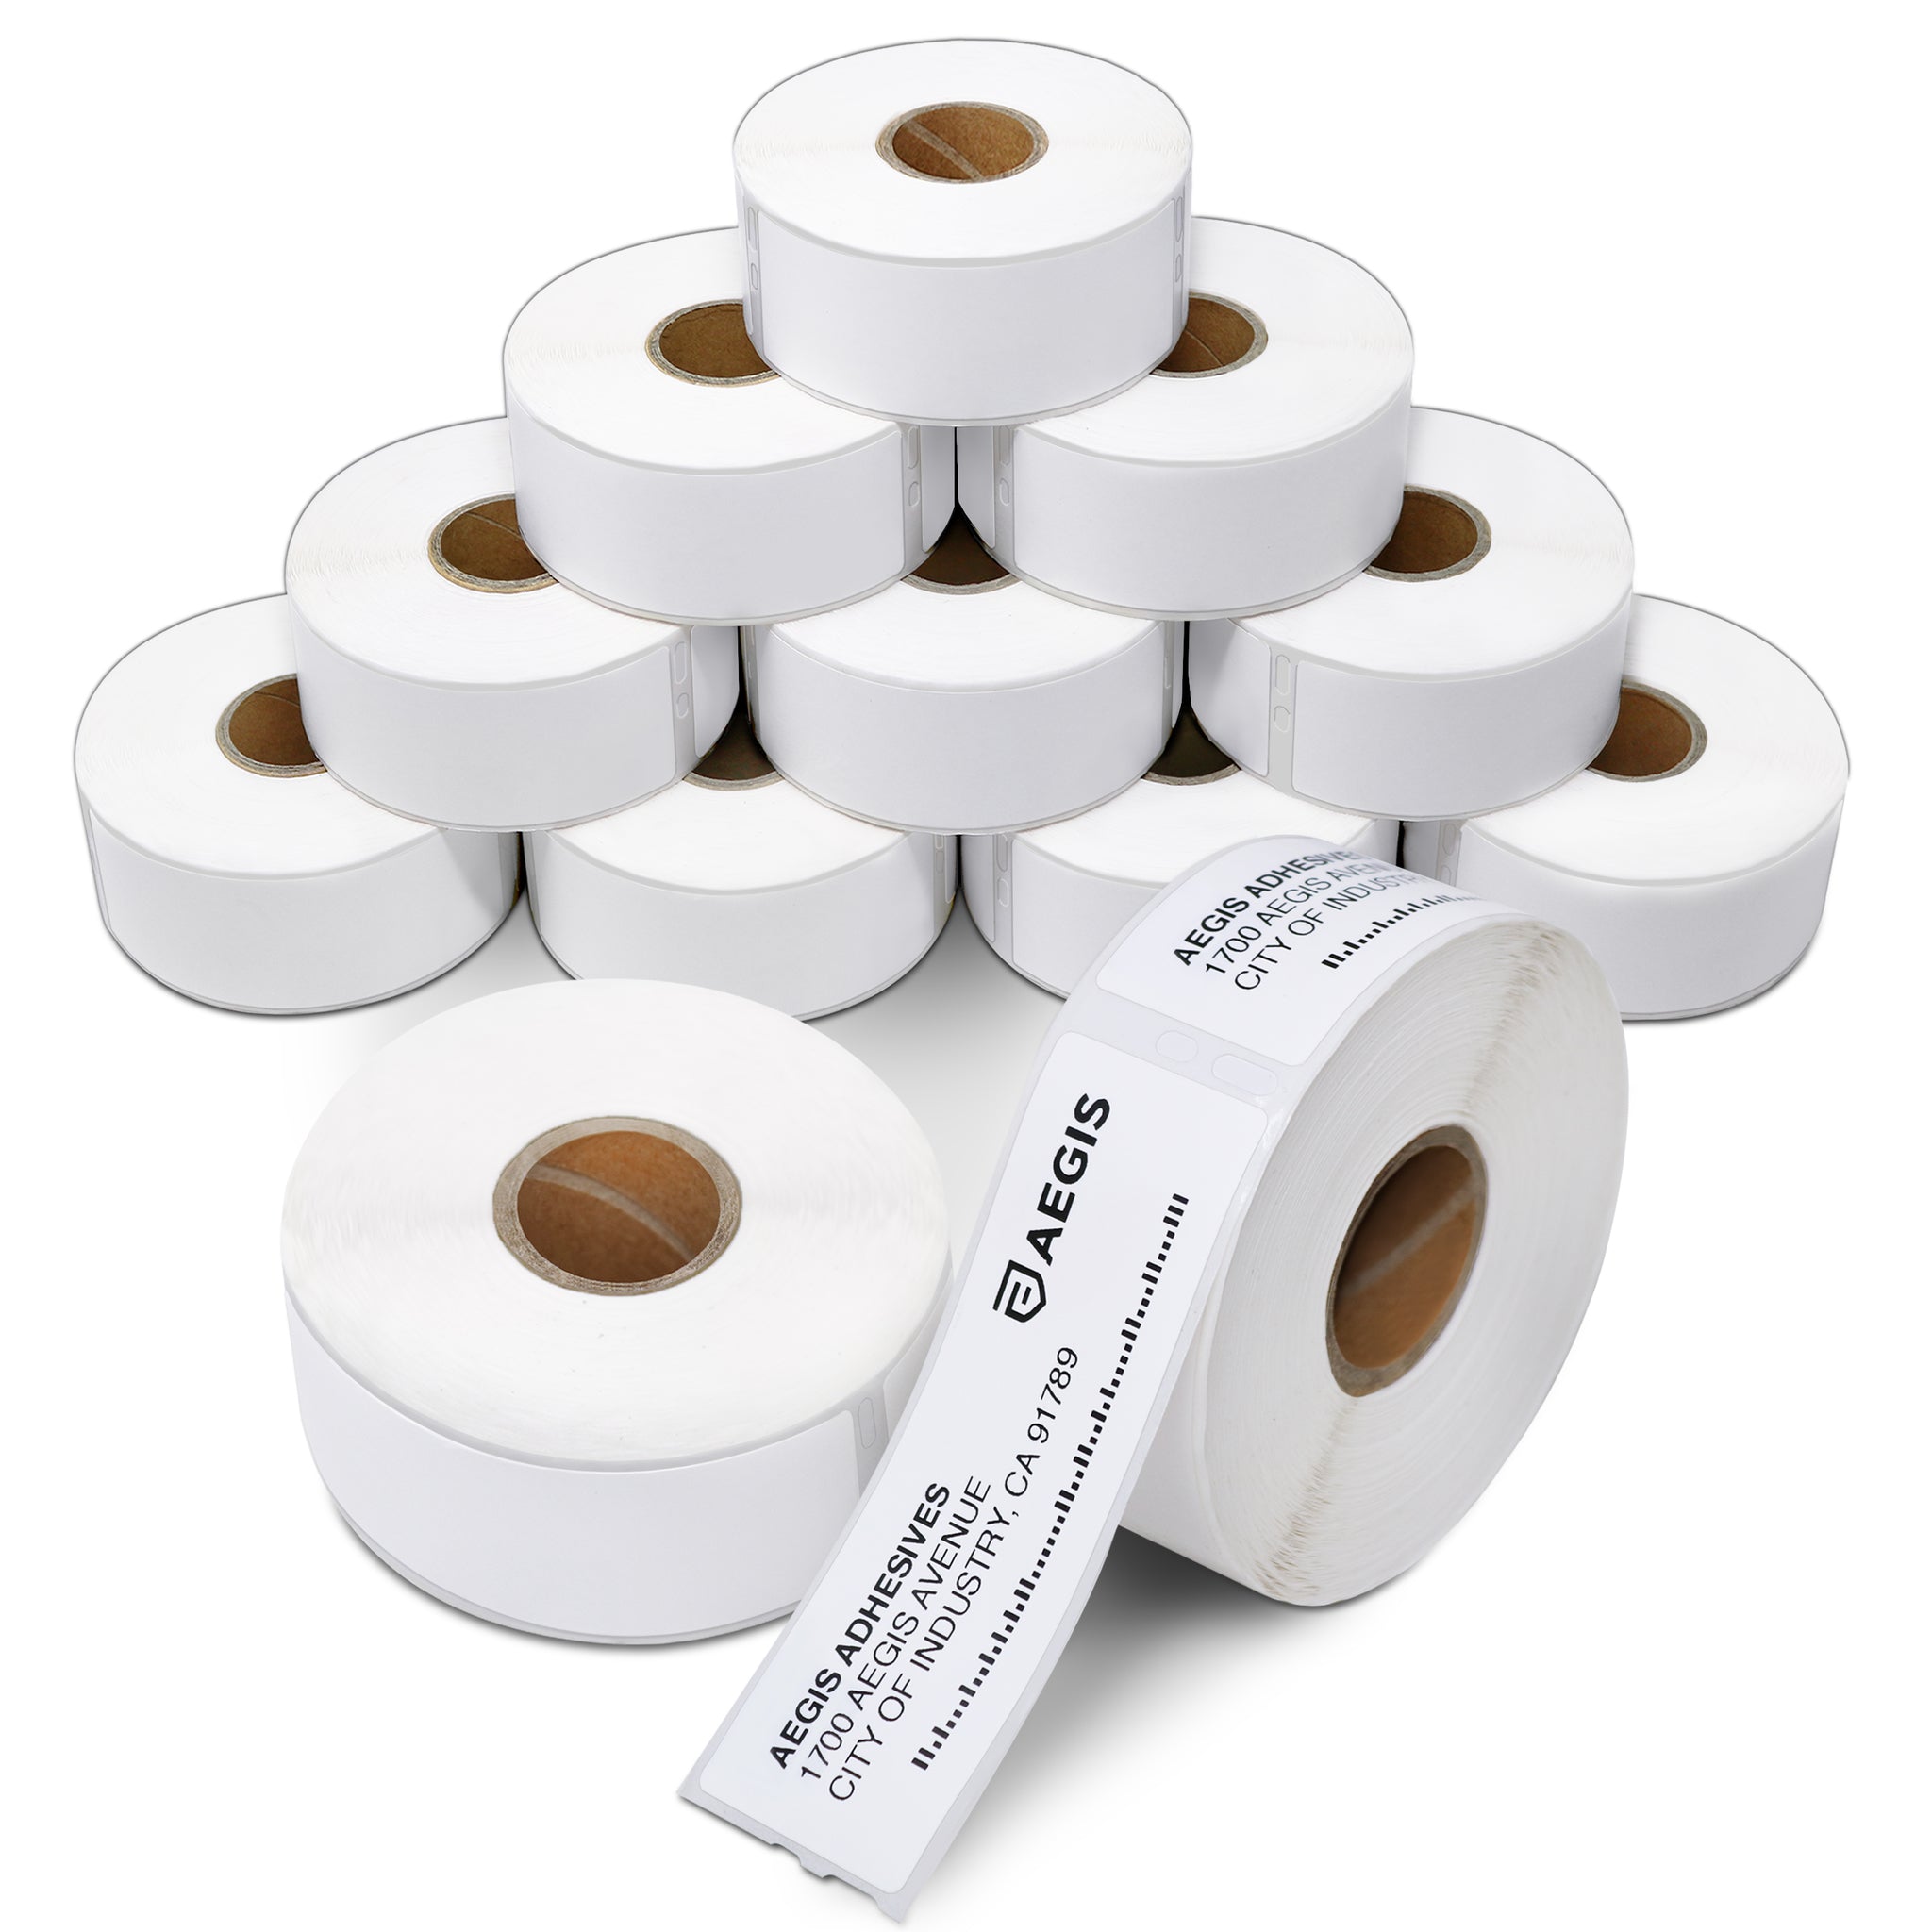 HouseLabels Compatible Dymo 30252 Address Labels (1-1/8 x 3-1/2) Compatible with Rollo, Some Dymo LW Printers, 12 Rolls / 350 Labels per Roll